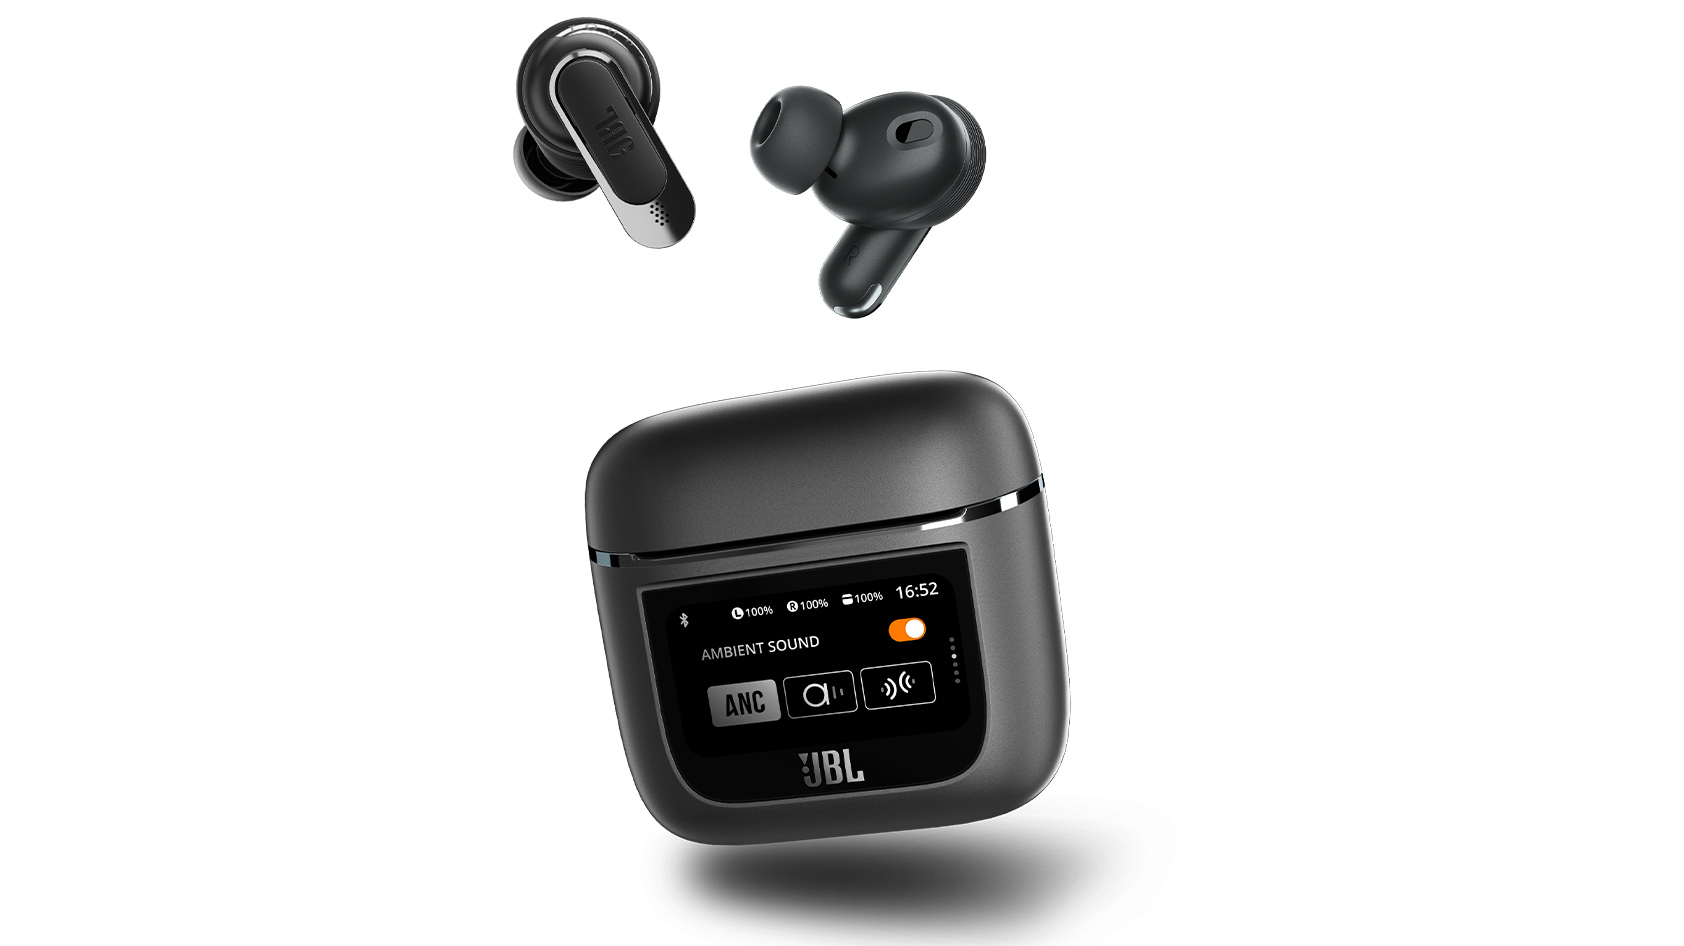 The JBL Tour Pro 2 true wireless earbuds and smartwatch-like charging case against a white background.